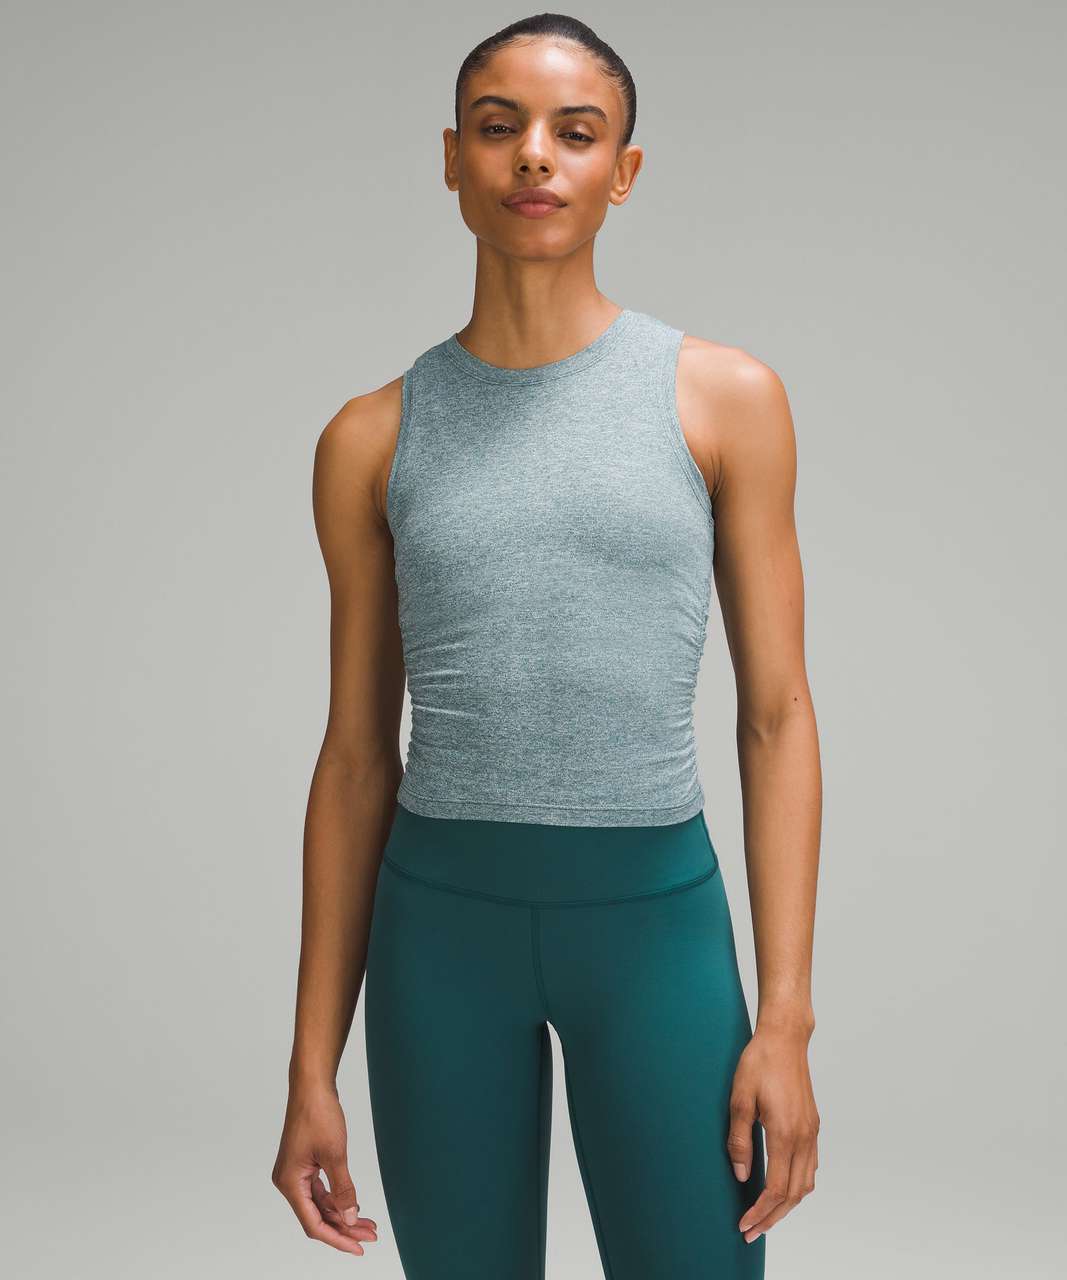 Lululemon License to Train Tight-Fit Tank Top - Heathered Storm Teal